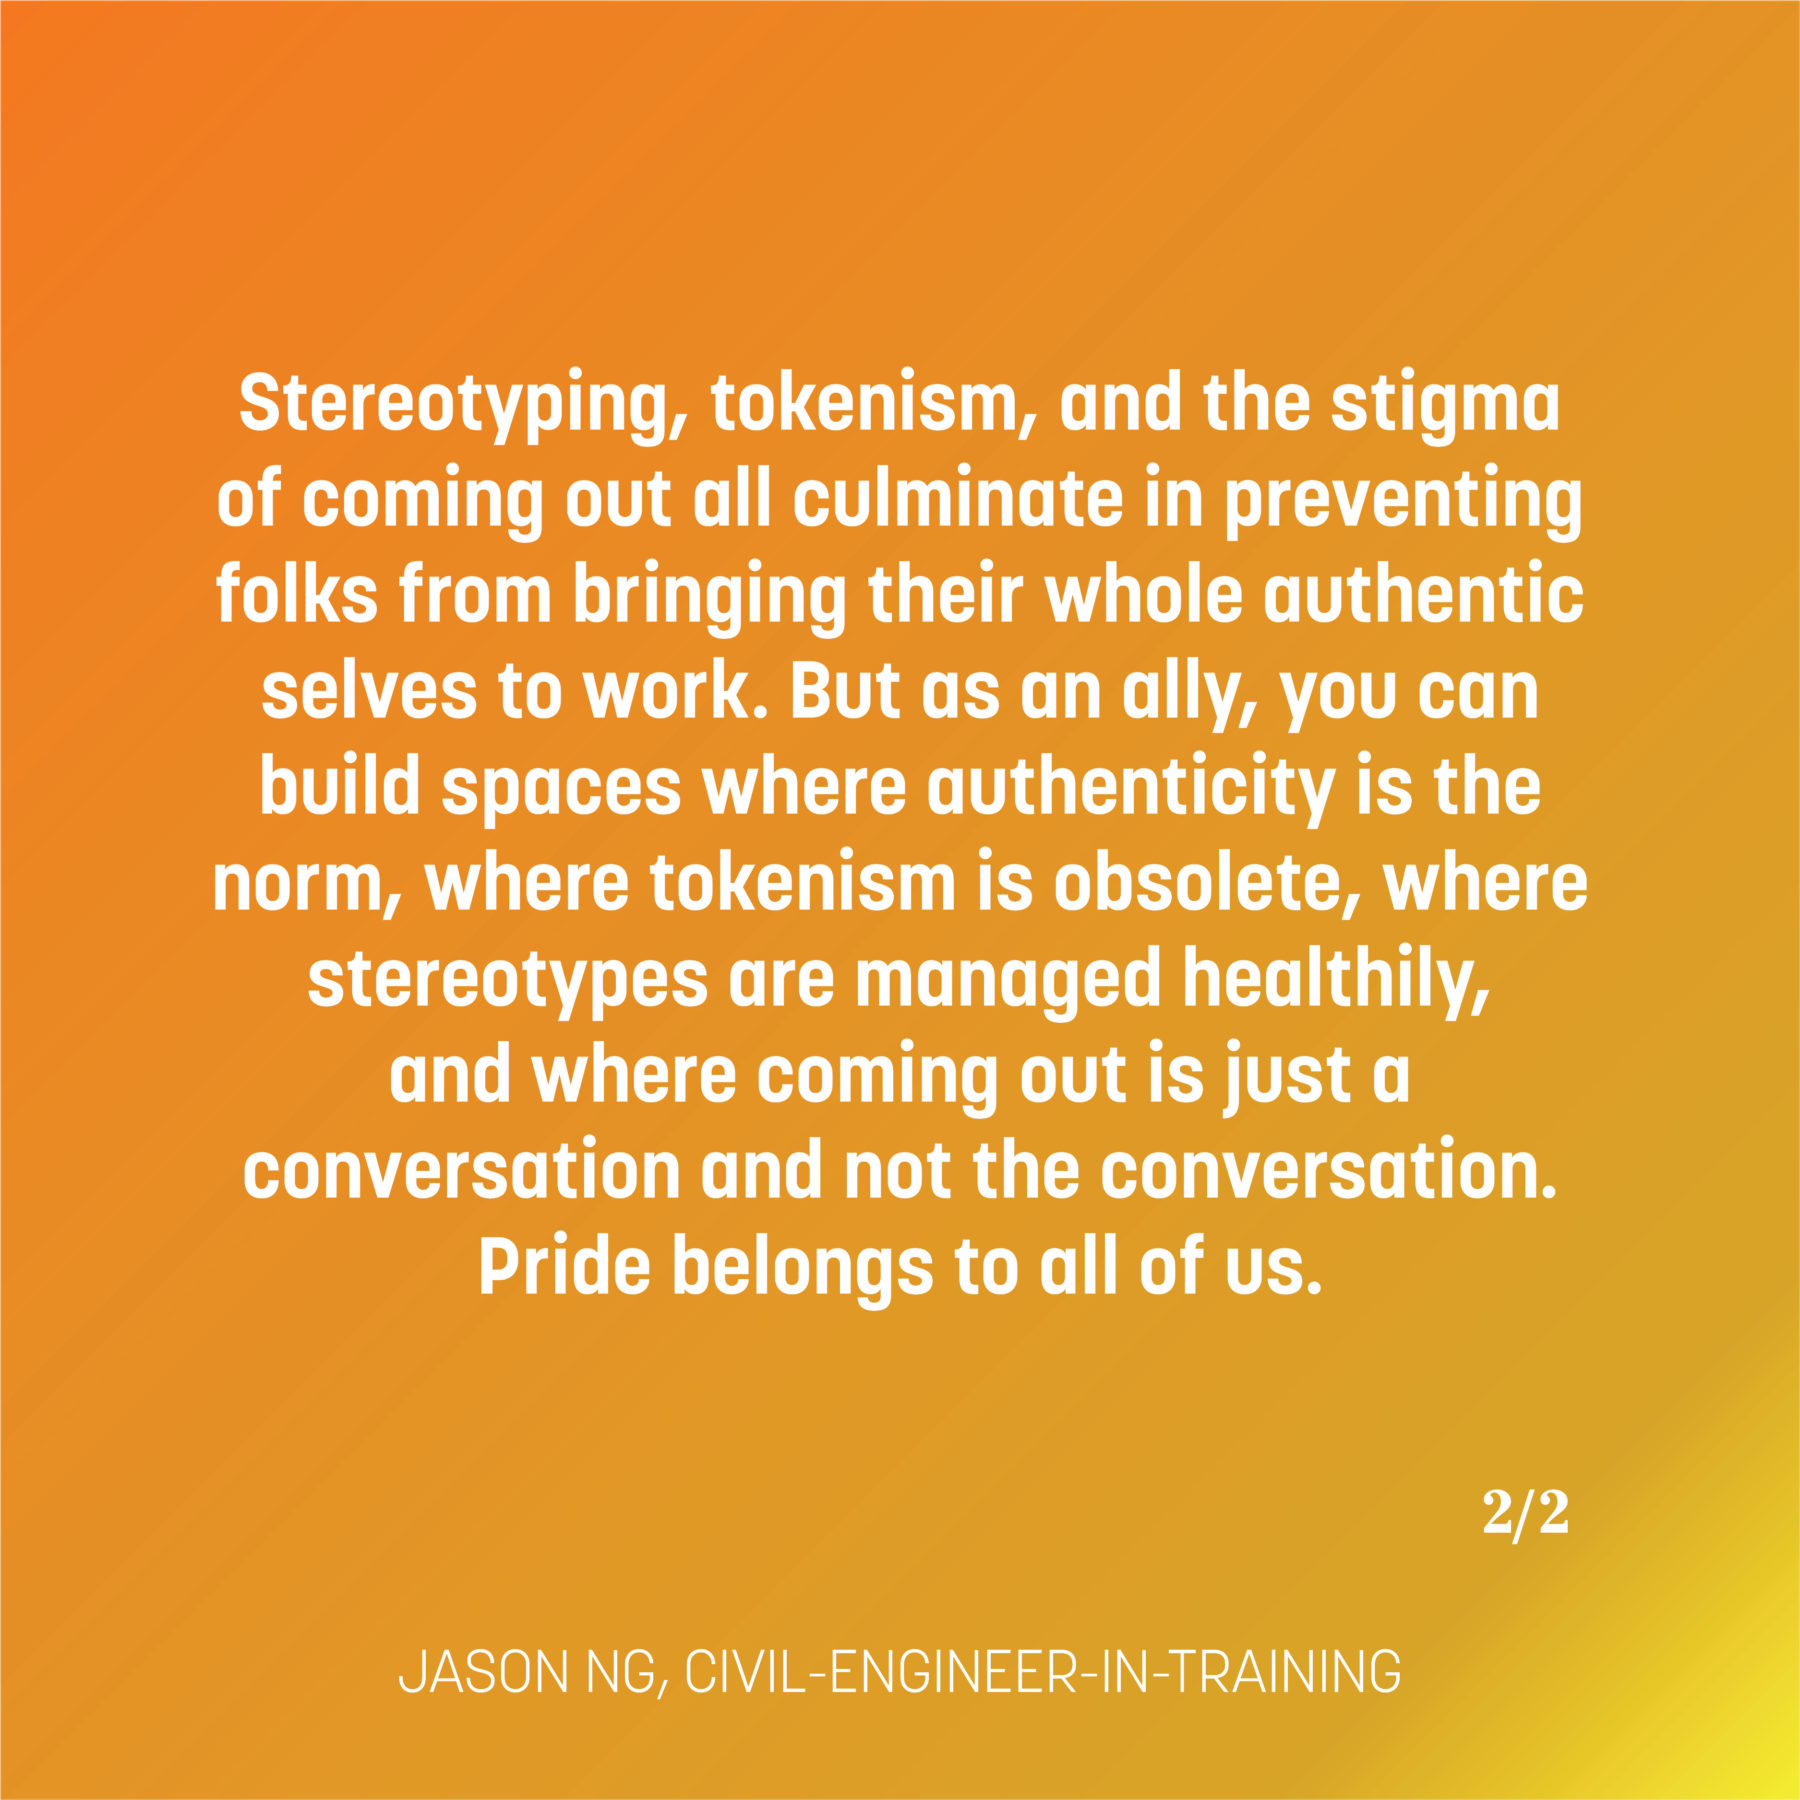 Text on a yellow and orange gradient reads: Stereotyping, tokenism, and the stigma of coming out all culminate in preventing folks from bringing their whole authentic selves to work. But as an ally, you can build spaces where authenticity is the norm, where tokenism is obsolete, where stereotypes are managed healthily, and where coming out is just a conversation and not the conversation. Pride belongs to all of us. -Jason Ng, civil engineer in training